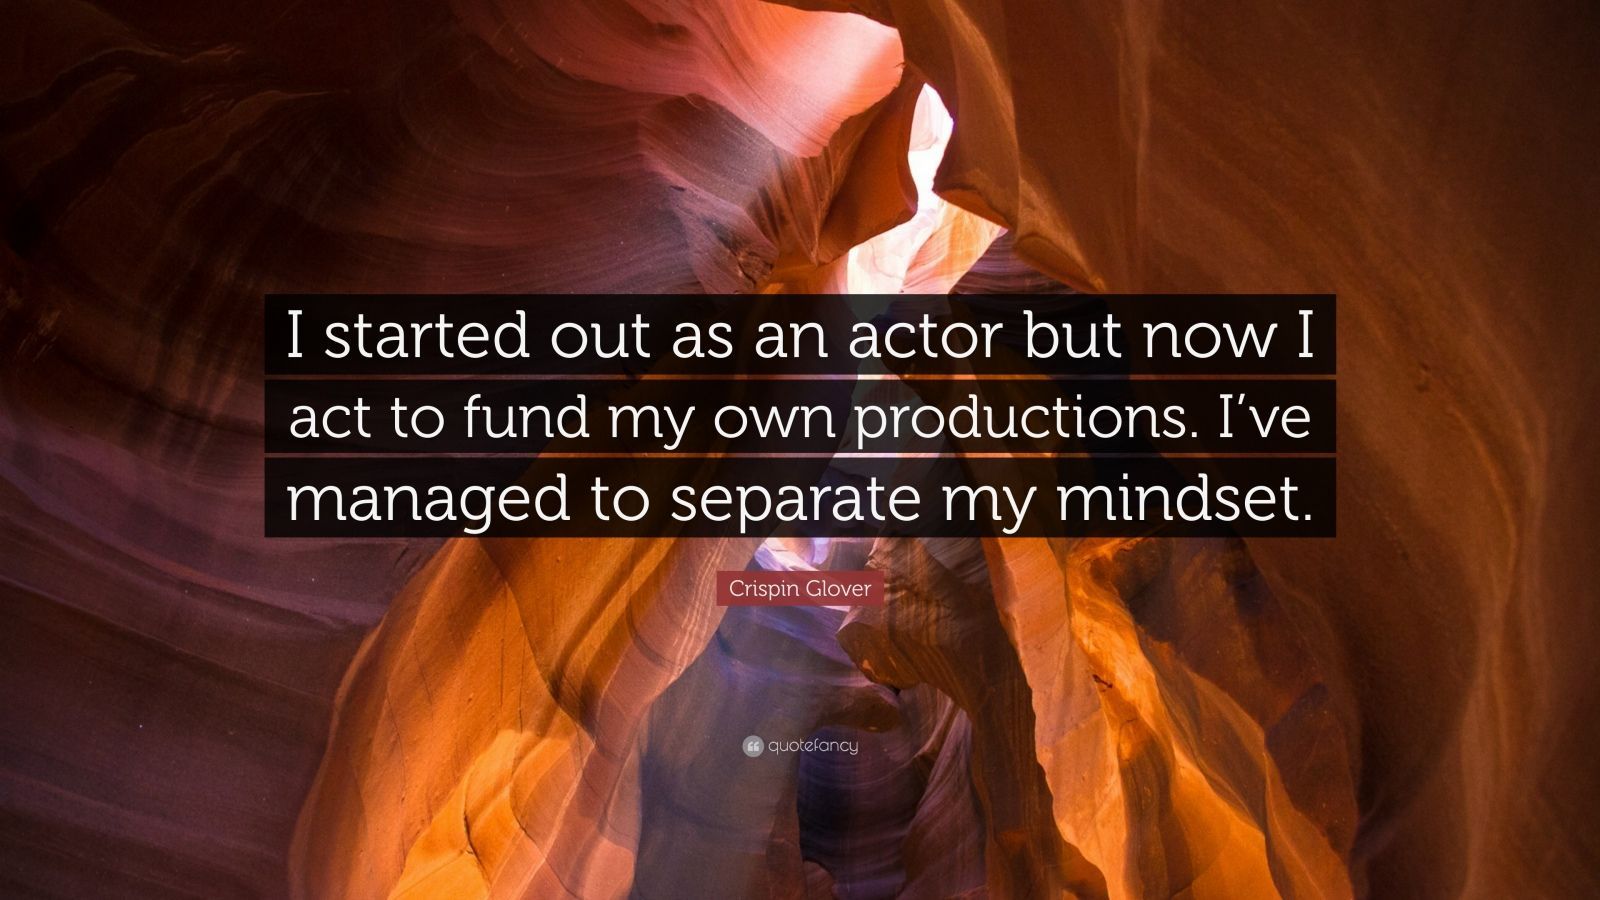 Crispin Glover Quote: “I started out as an actor but now I act to fund my own productions. I've managed to separate my mindset.” (7 wallpaper)